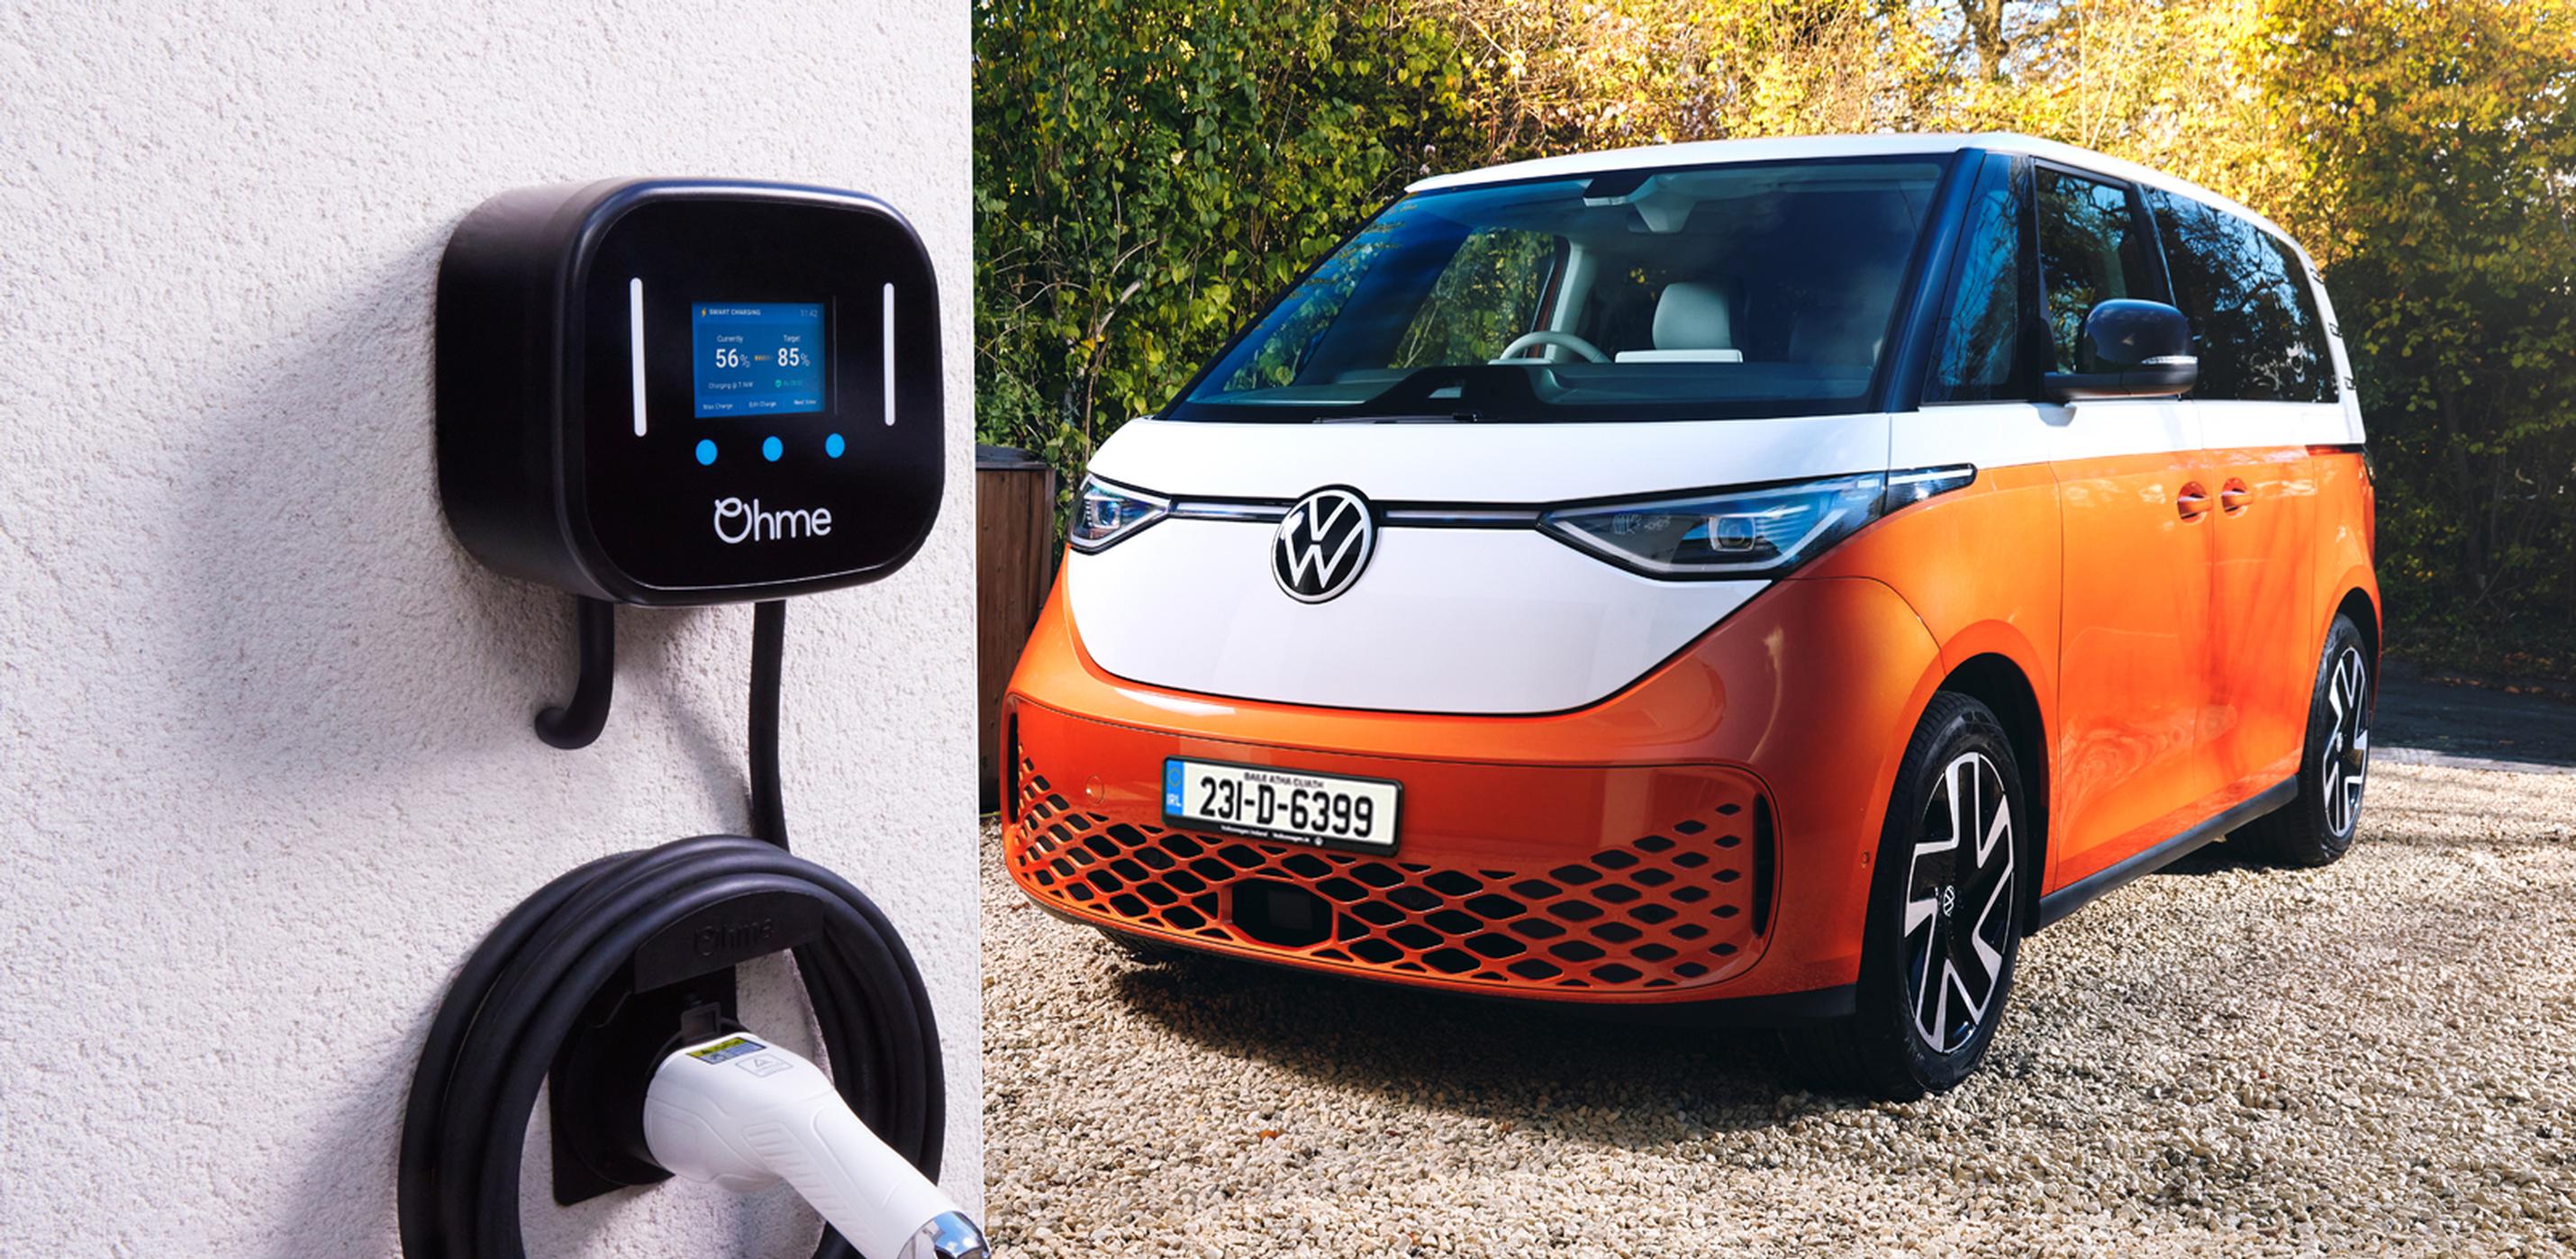 Ohme is the official EV charger provider for the Volkswagen Group